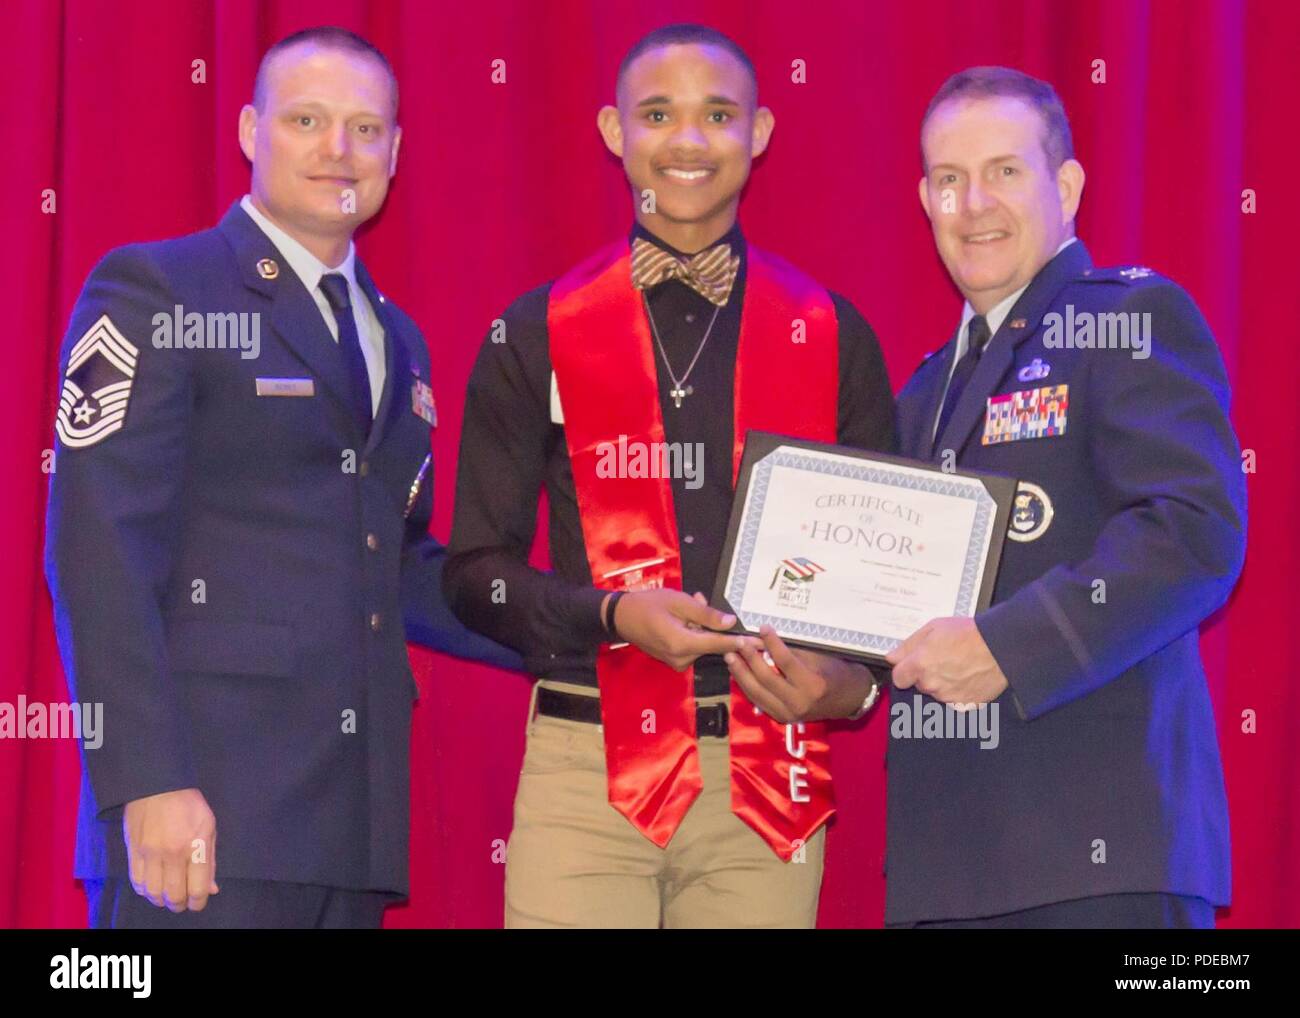 SAN ANTONIO – (May 16, 2018) Air Force Col. Sean McKenna, chief of Plans and Resources Division, Headquarters Air Force Recruiting Service, and Chief Master Sgt. William Rawls pose with a future Airman, who was honored during “A Night in Your Honor” hosted by Our Community Salutes-San Antonio (OCS) held in the Rosenberg Sky Room at the University of the Incarnate Word.  Each honoree received an OCS certificate and challenge coin from USAA. OCS is a non-profit organization created in 2009 by Dr. Kenneth E. Hartman to recognize and honor local graduating high school seniors who plan to enlist in Stock Photo